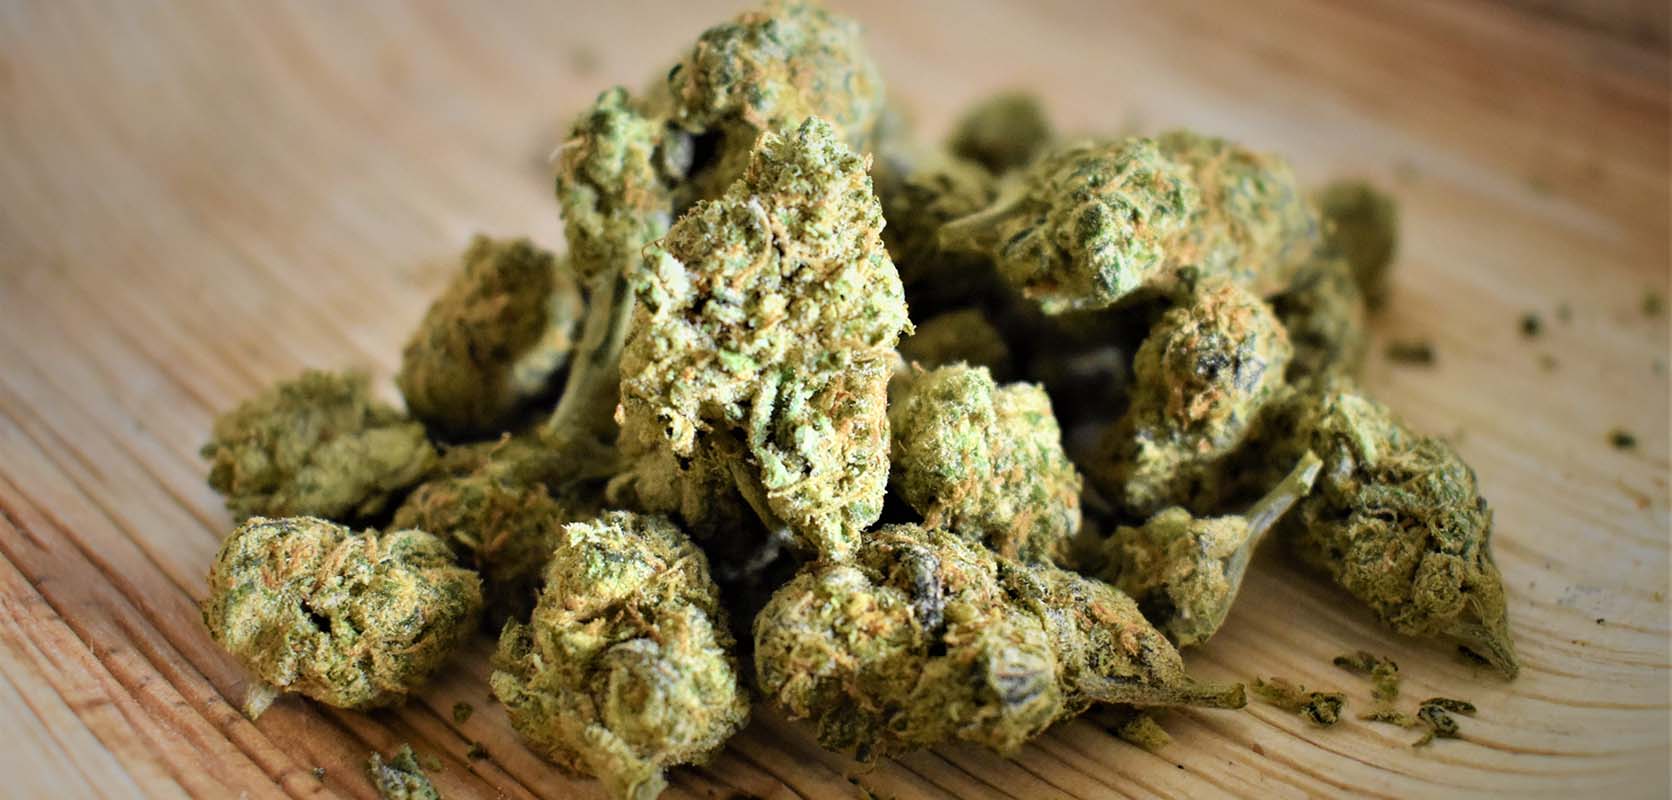 image of high-quality weed for sale online in canada. buying weed online. order weed canada. weed shop online.